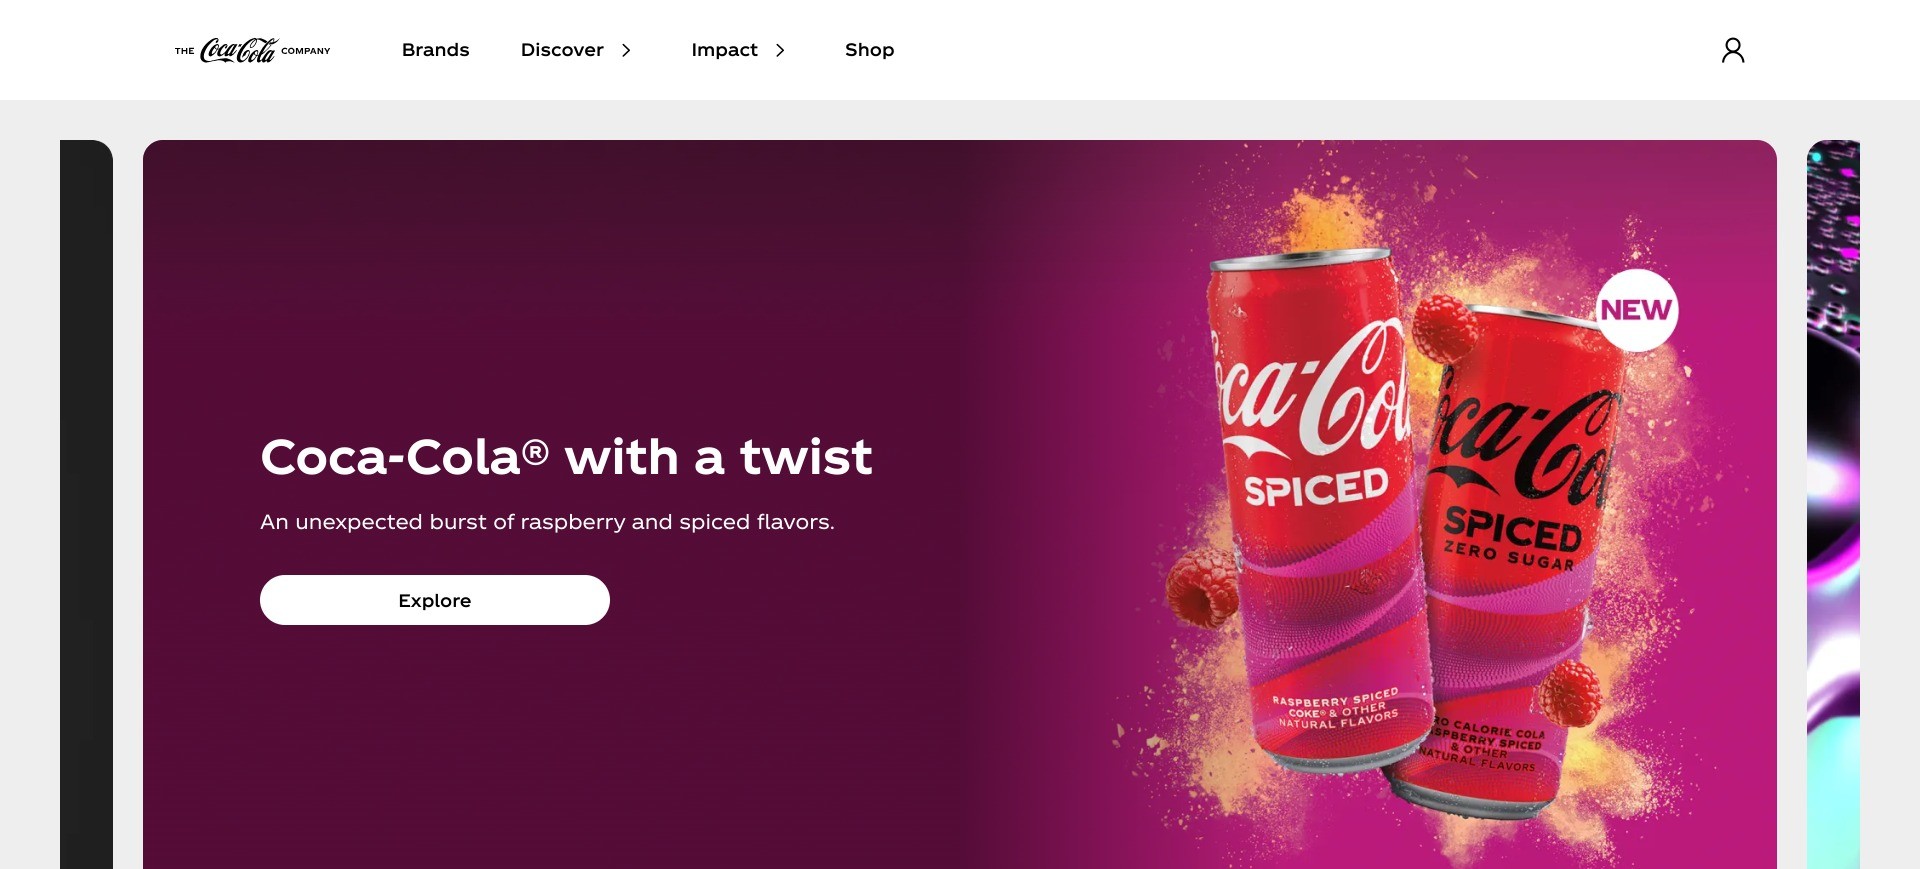 Screenshot of https://www.coca-cola.com/us/en displaying the brand name with an ® symbol in superscript